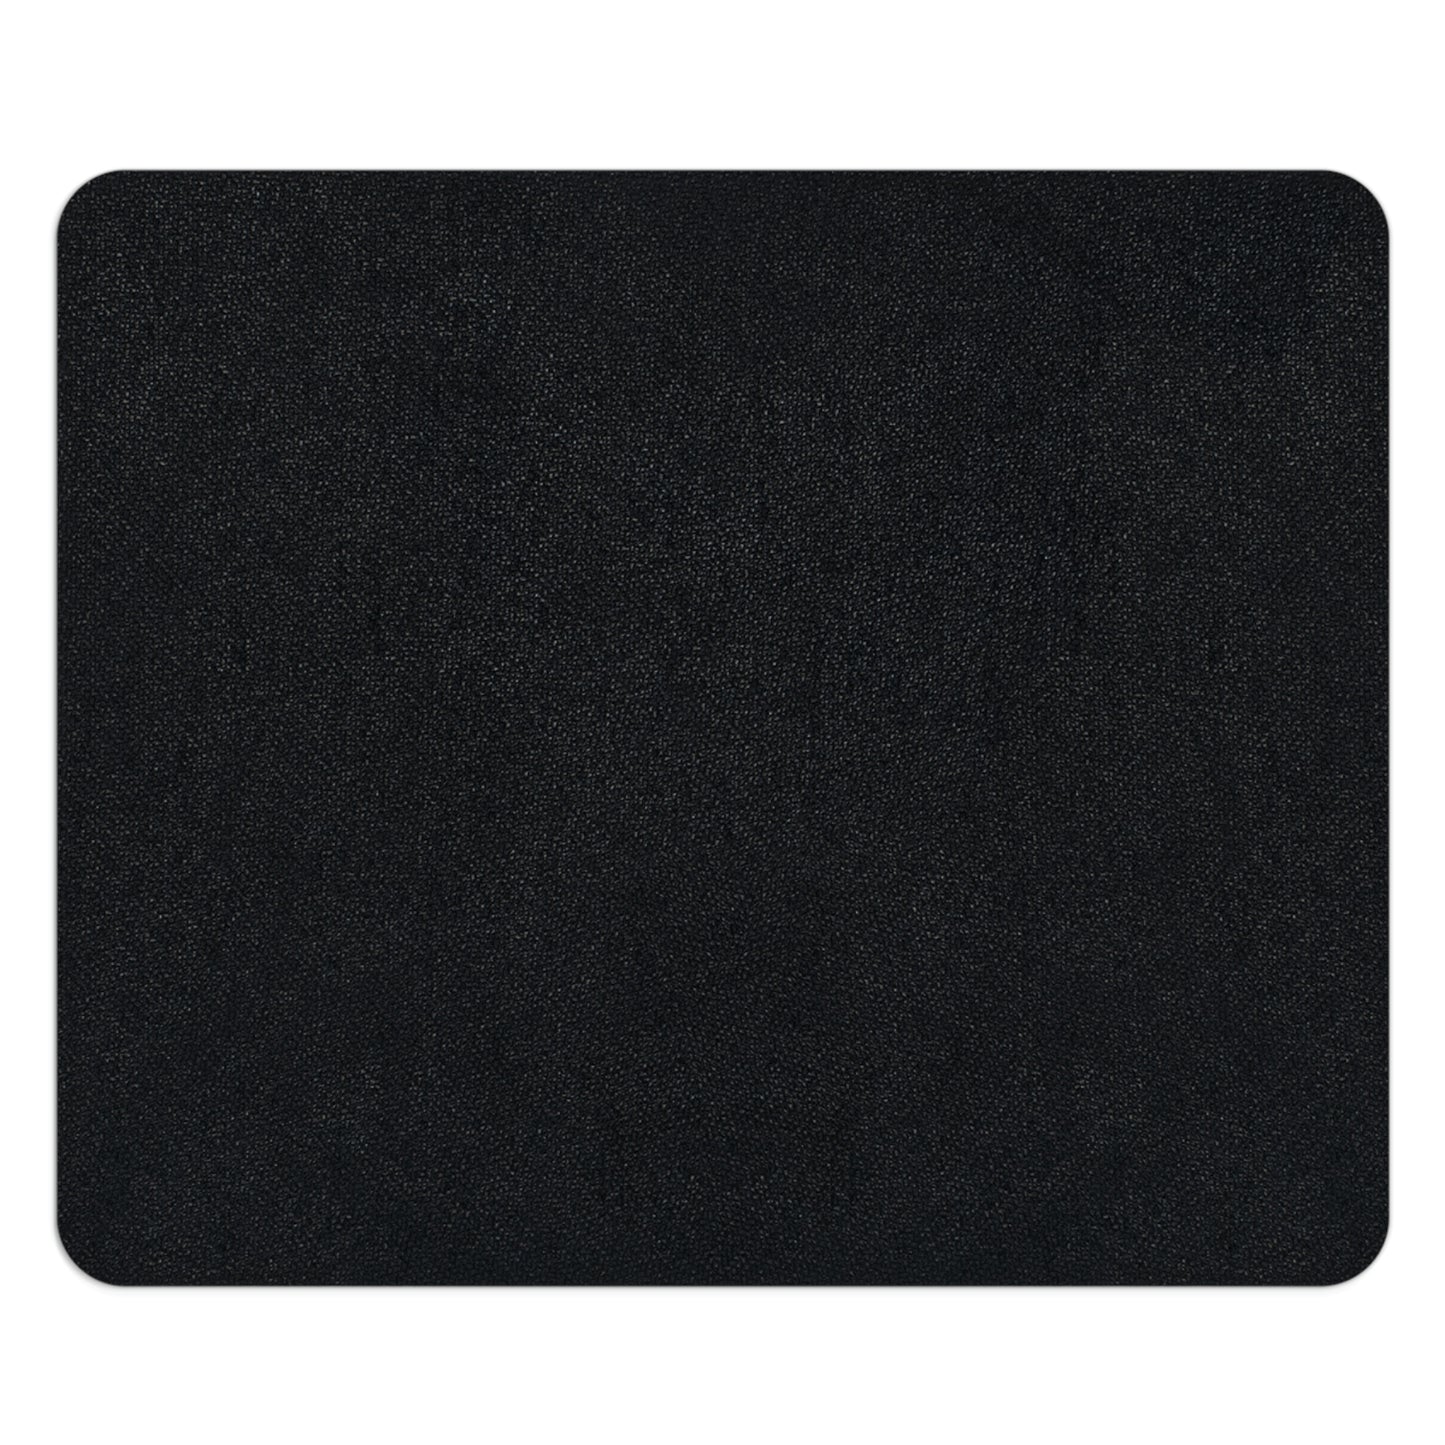 The Kitty Cat Cried! Mouse Pad